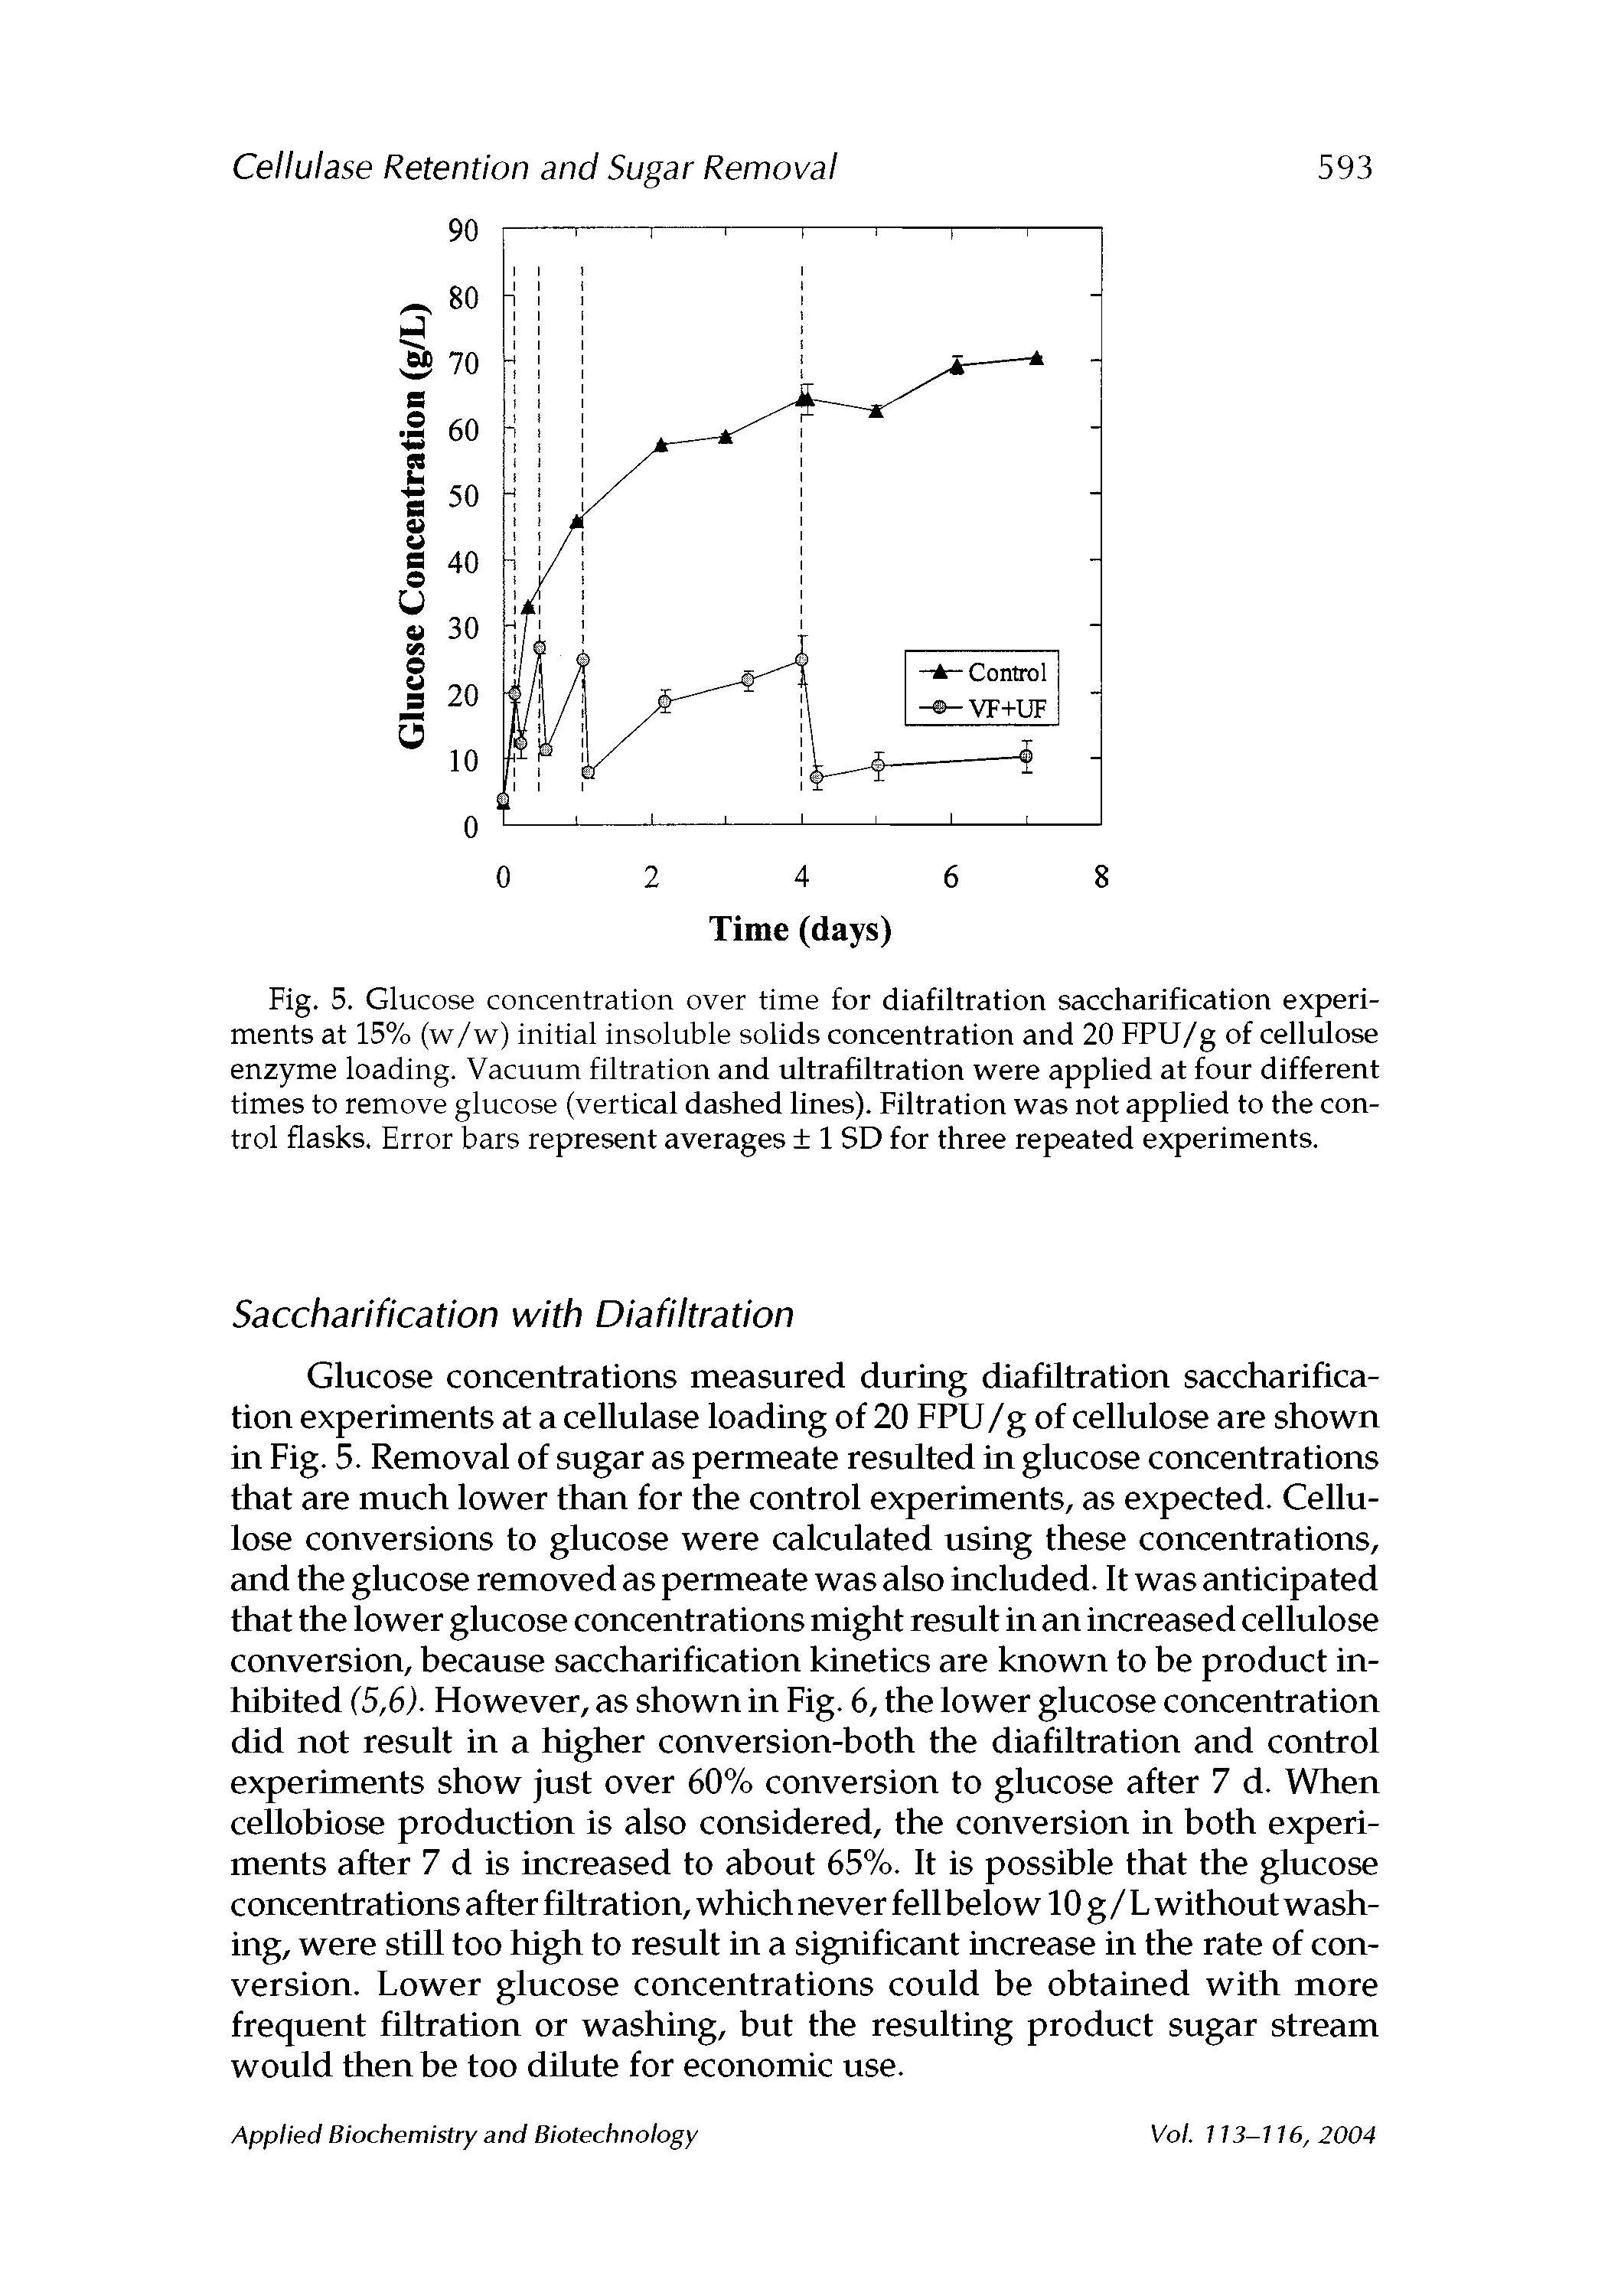 Fig. 5. Glucose concentration over time for diafiltration saccharification experiments at 15% (w/w) initial insoluble solids concentration and 20 FPU/g of cellulose enzyme loading. Vacuum filtration and ultrafiltration were applied at four different times to remove glucose (vertical dashed lines). Filtration was not applied to the control flasks. Error bars represent averages 1 SD for three repeated experiments.